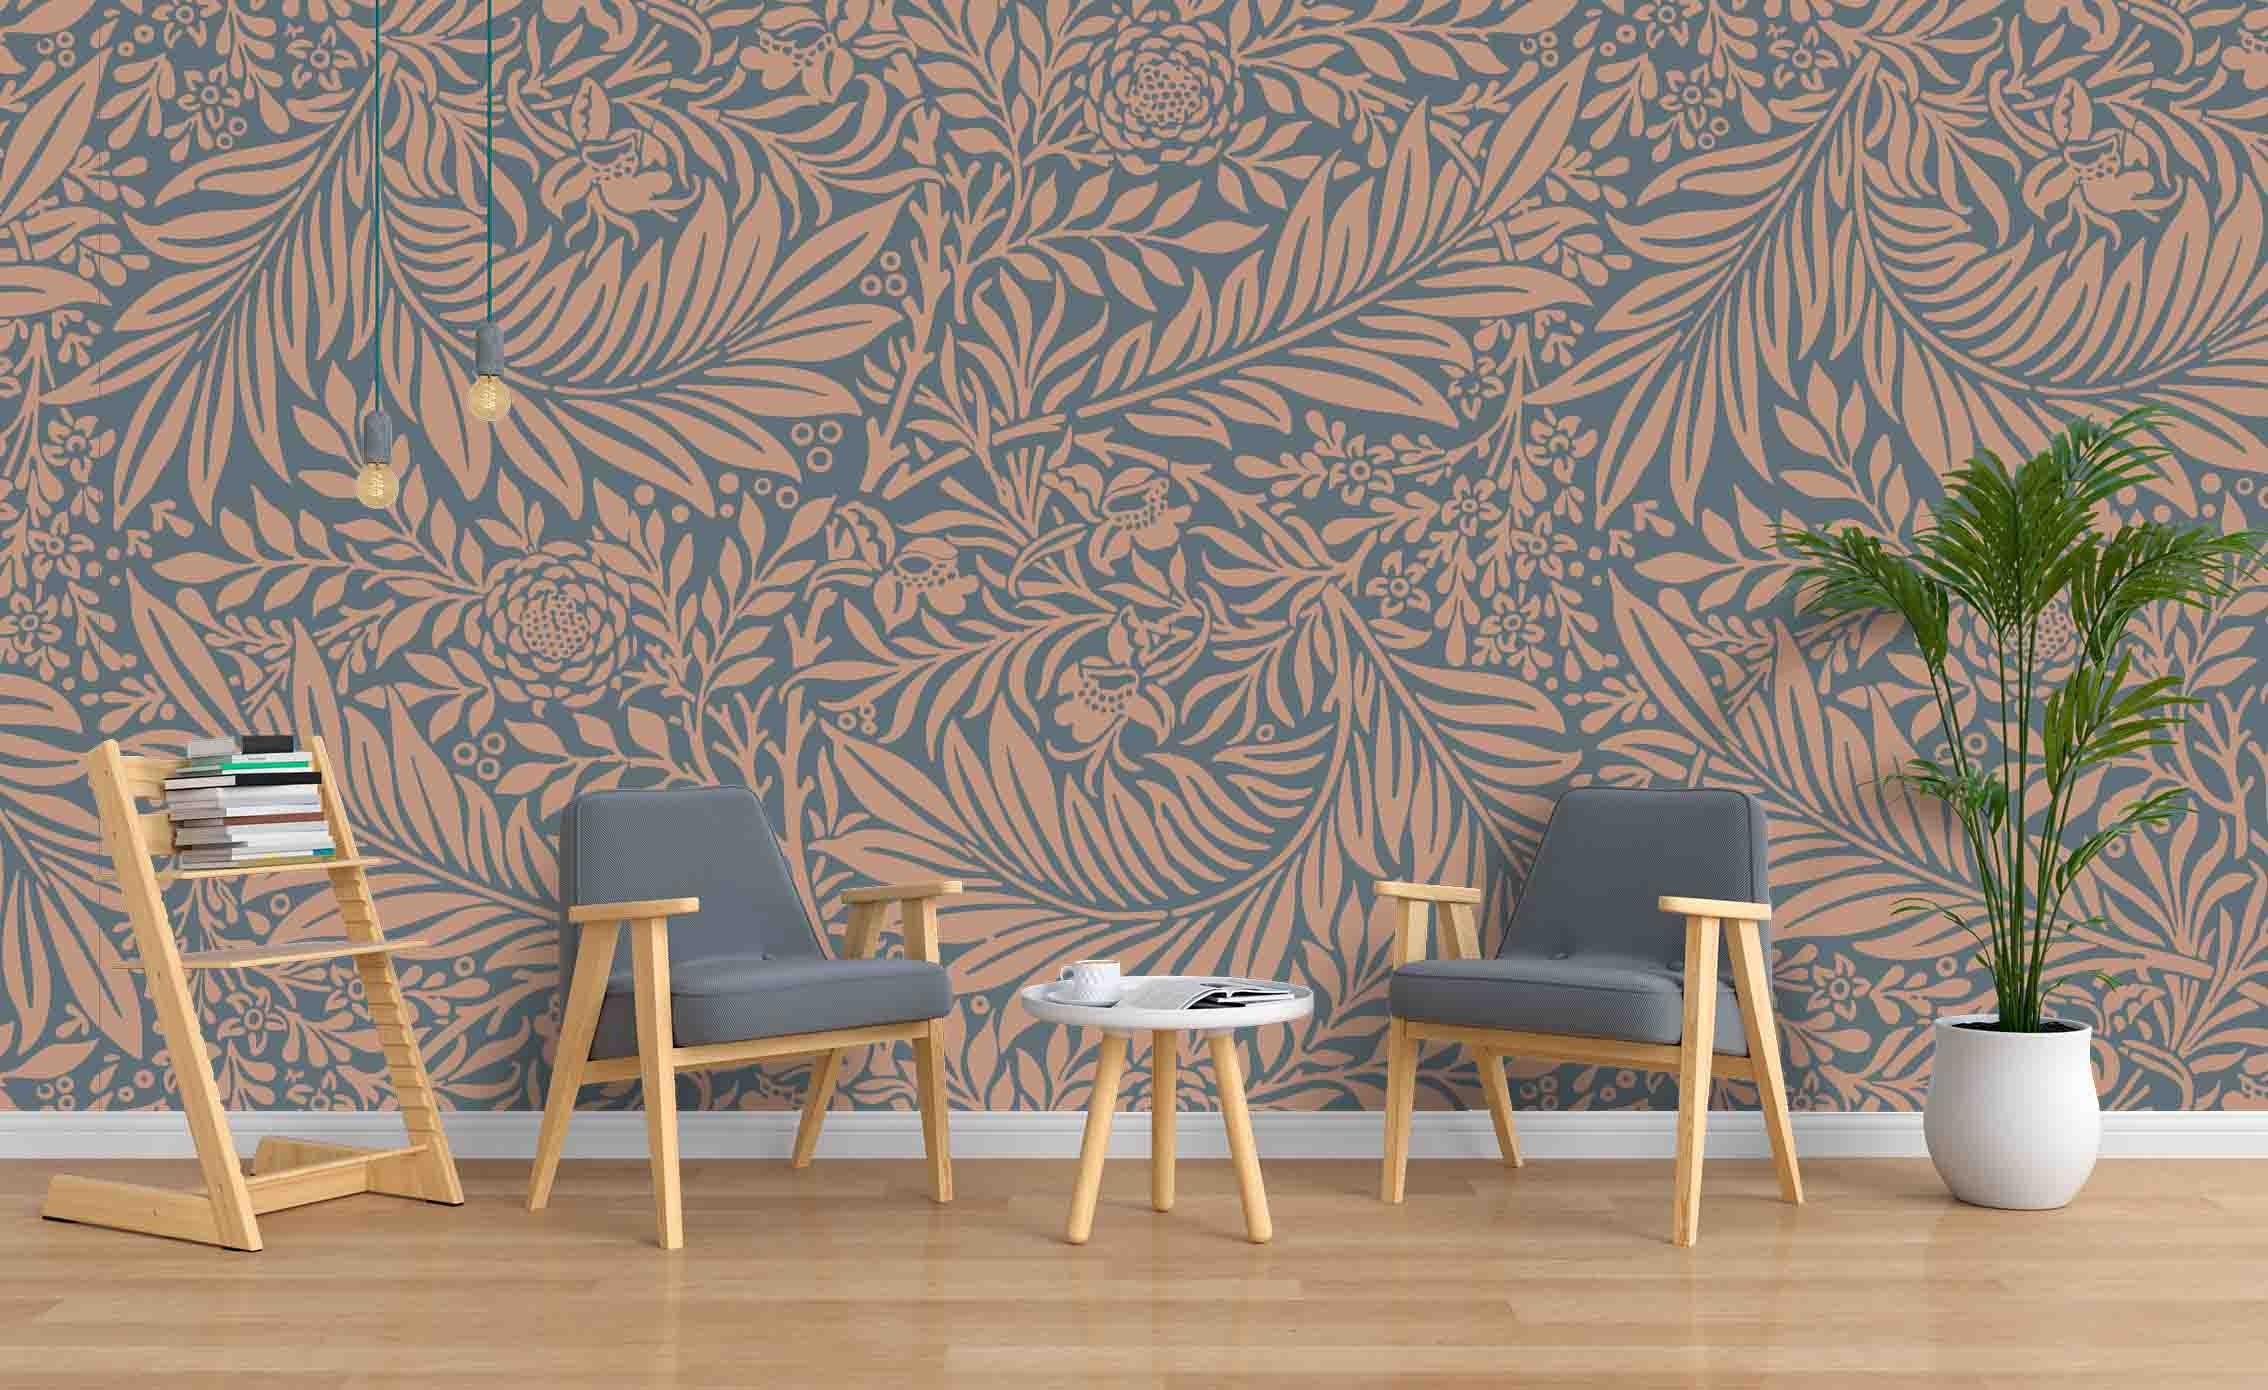 3D Brown Floral Leaves Wall Mural Wallpaper A151 LQH- Jess Art Decoration